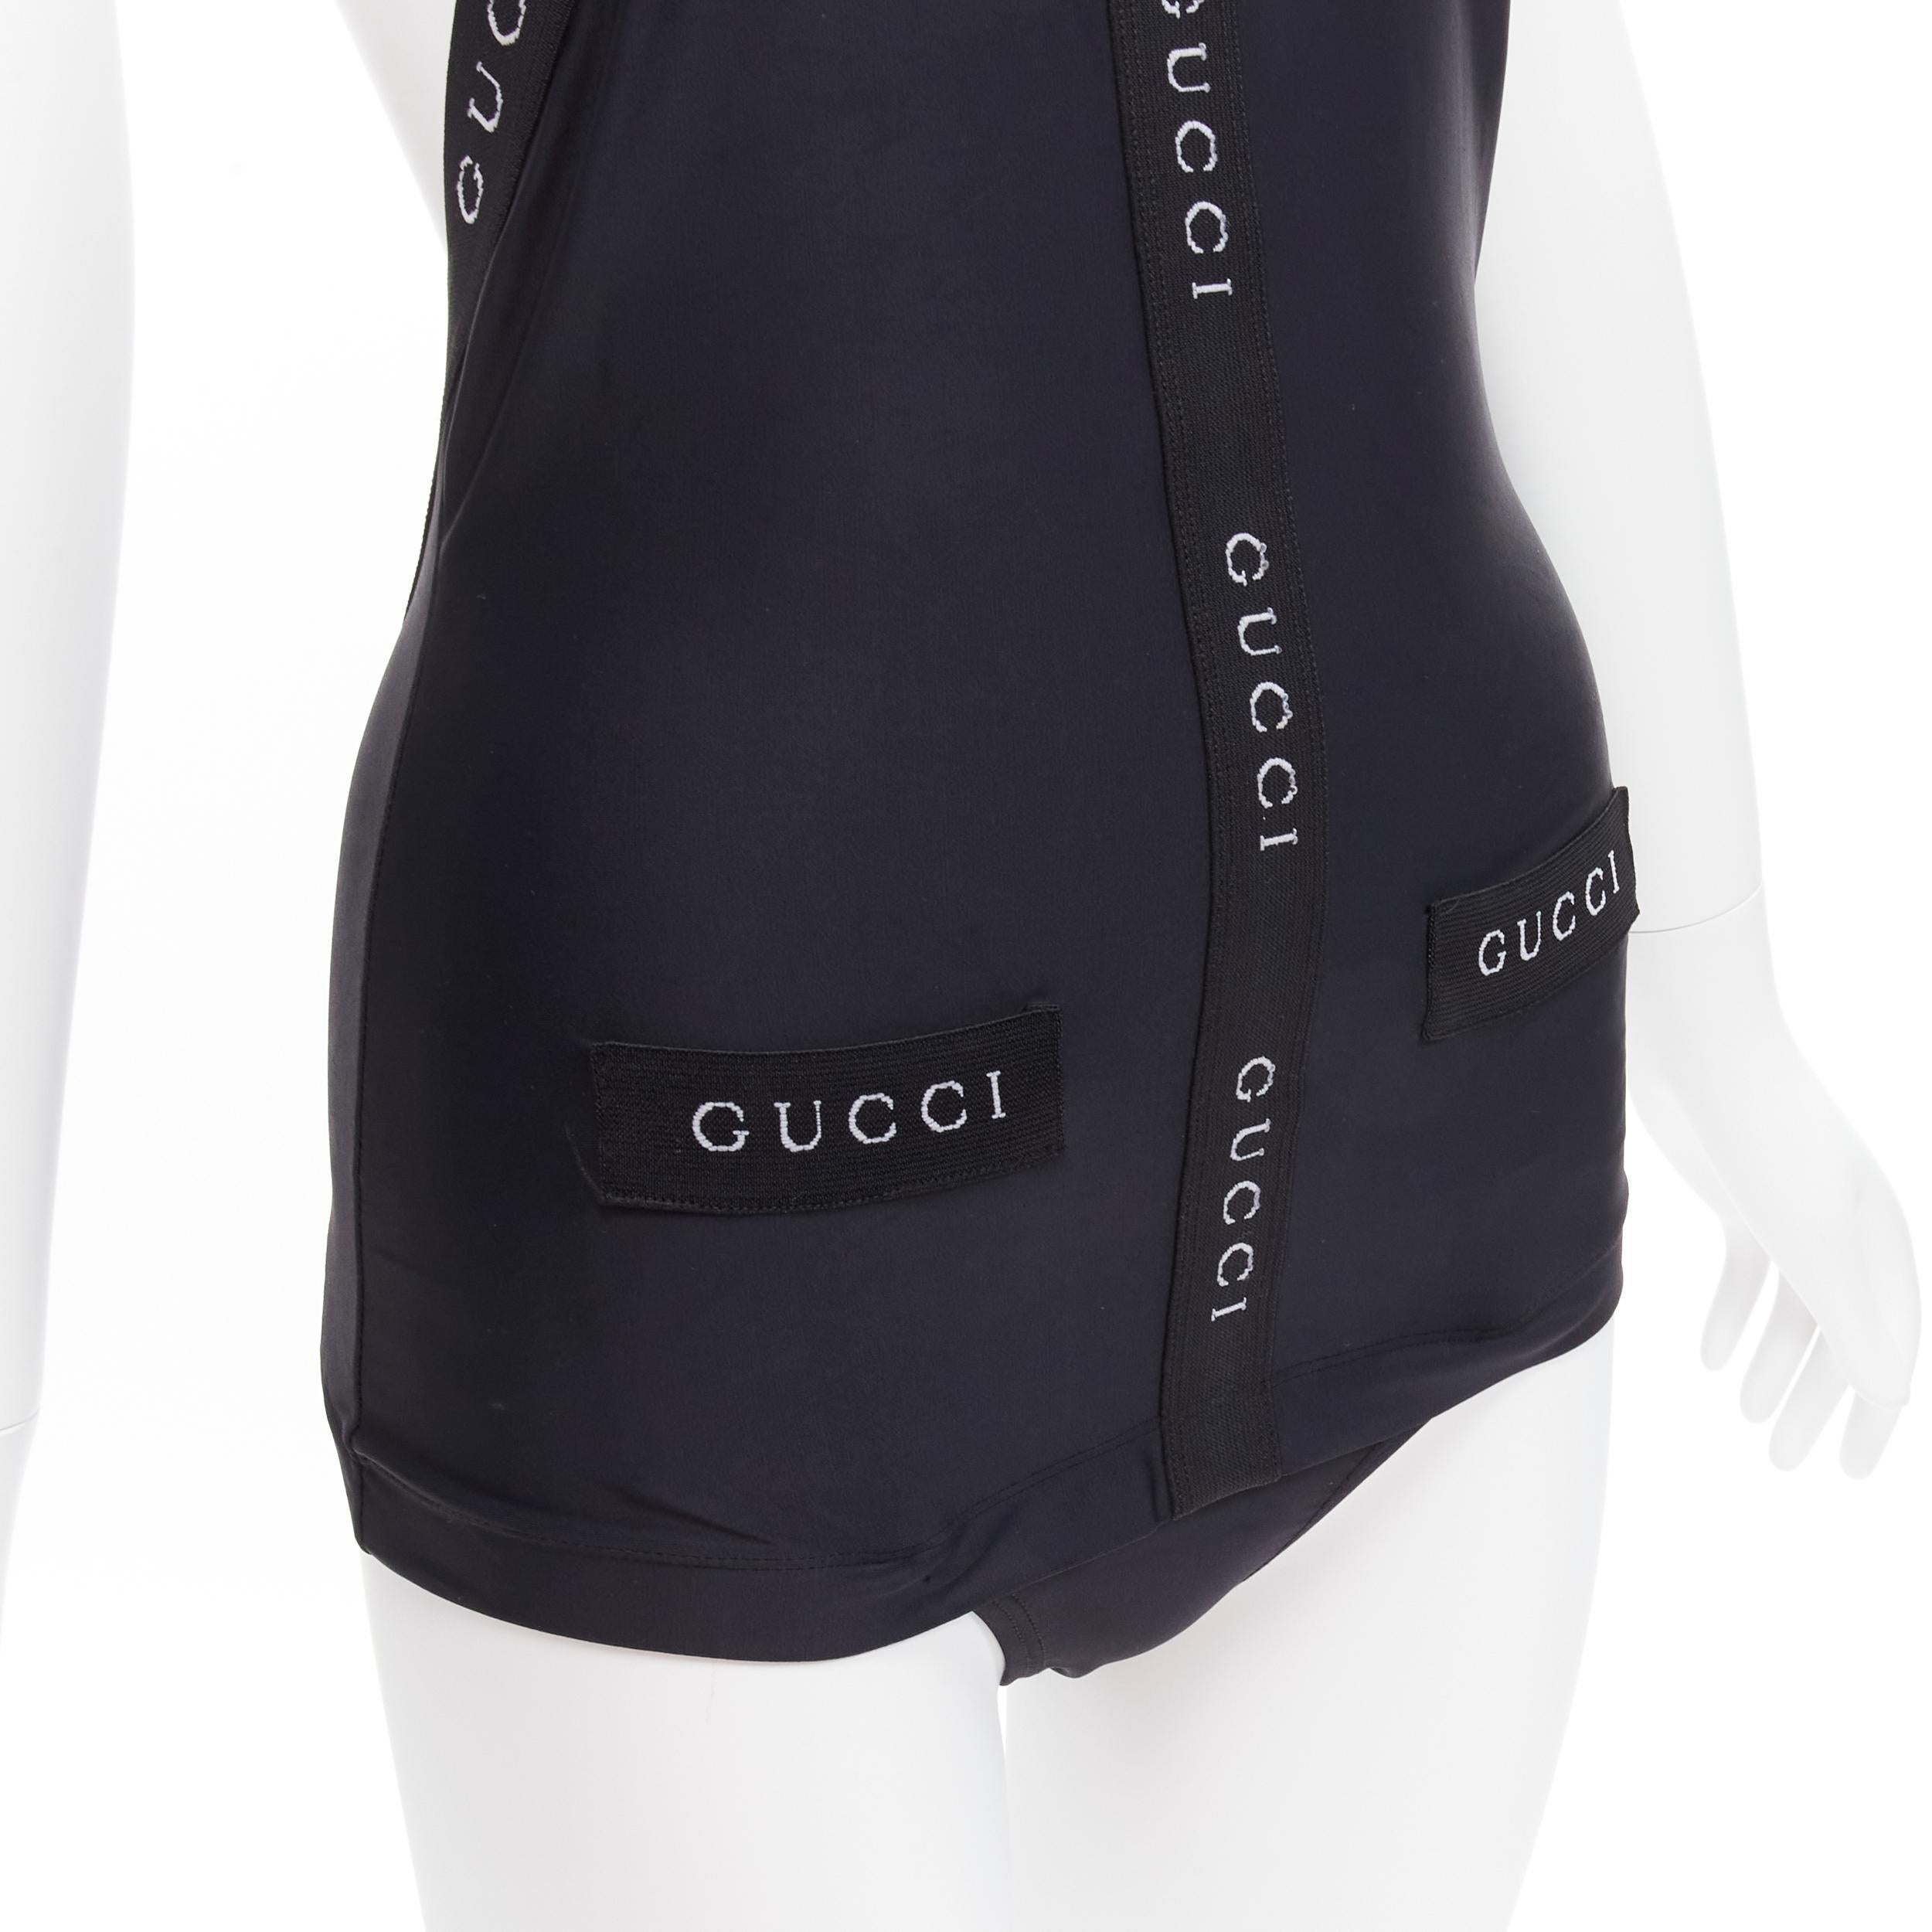 GUCCI Tom Ford Vintage black logo trim halter layered one piece swimwear XS
Reference: TGAS/D00173
Brand: Gucci
Designer: Tom Ford
Material: Nylon
Color: Black, White
Pattern: Solid
Closure: Slip On
Lining: Black
Made in: